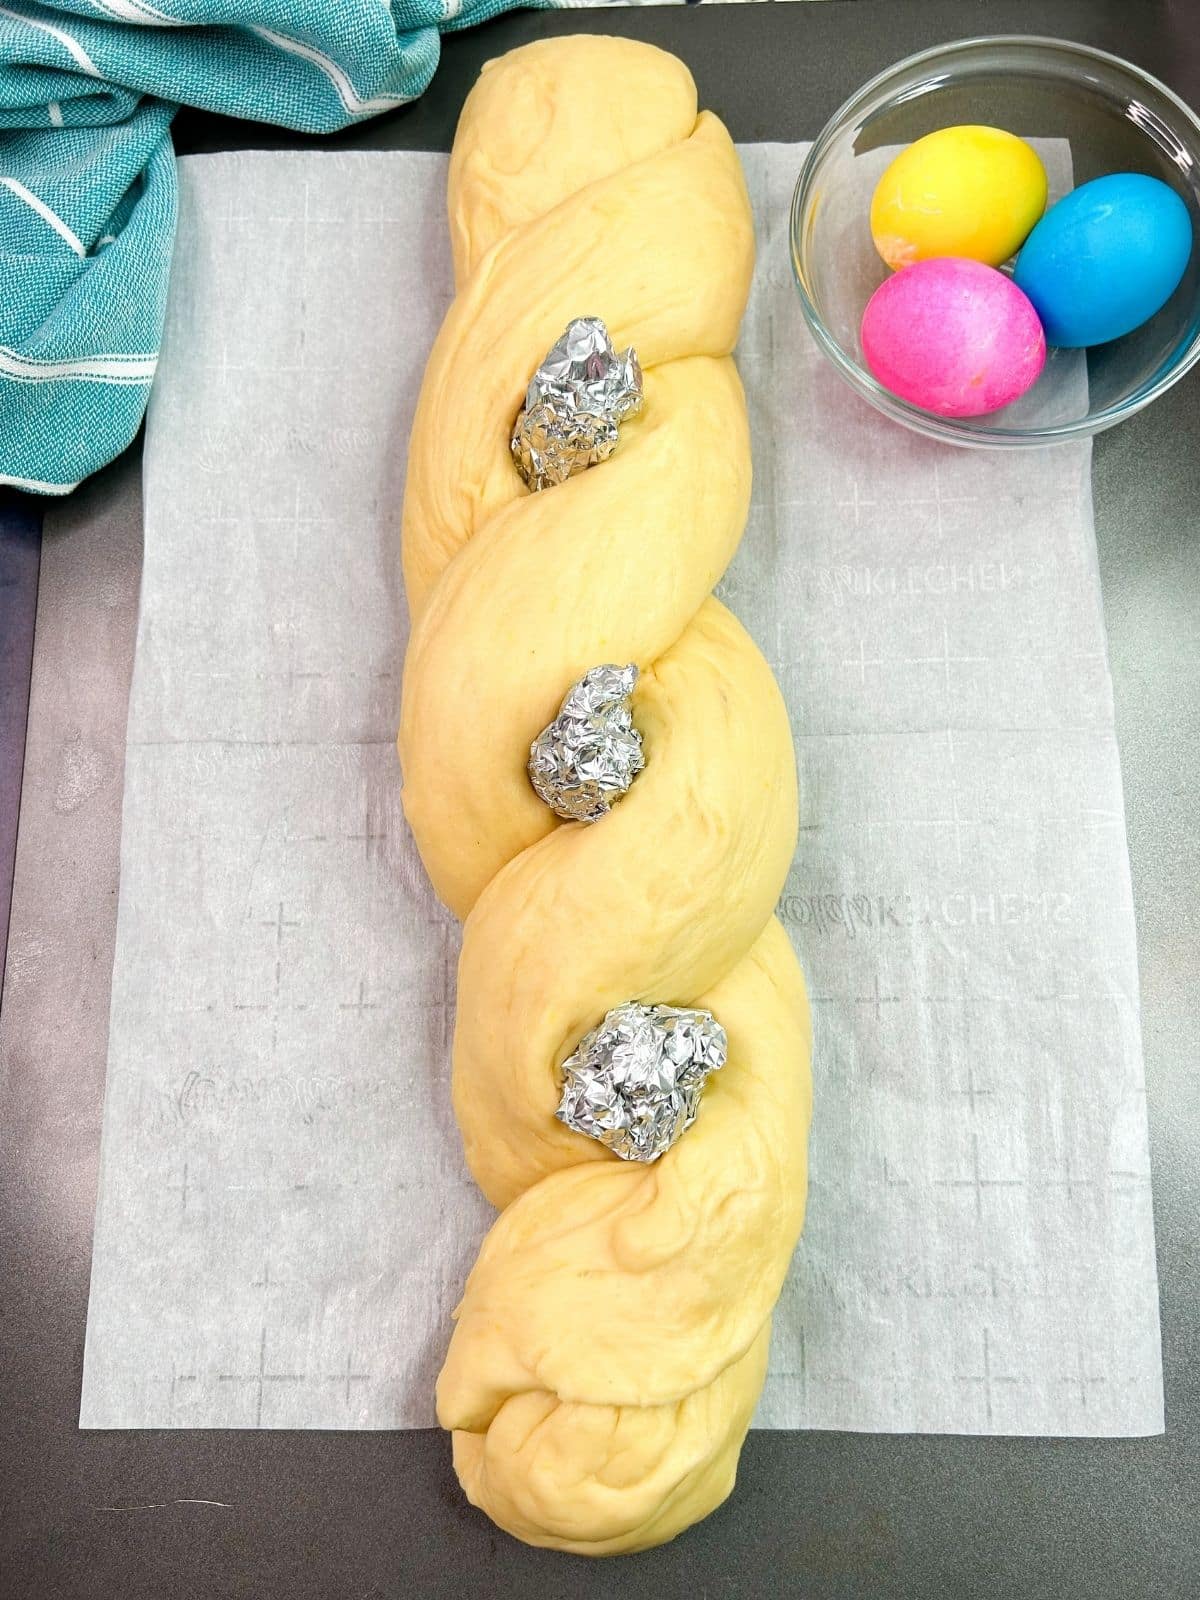 raw dough braid with aluminum foil eggs as place holders.